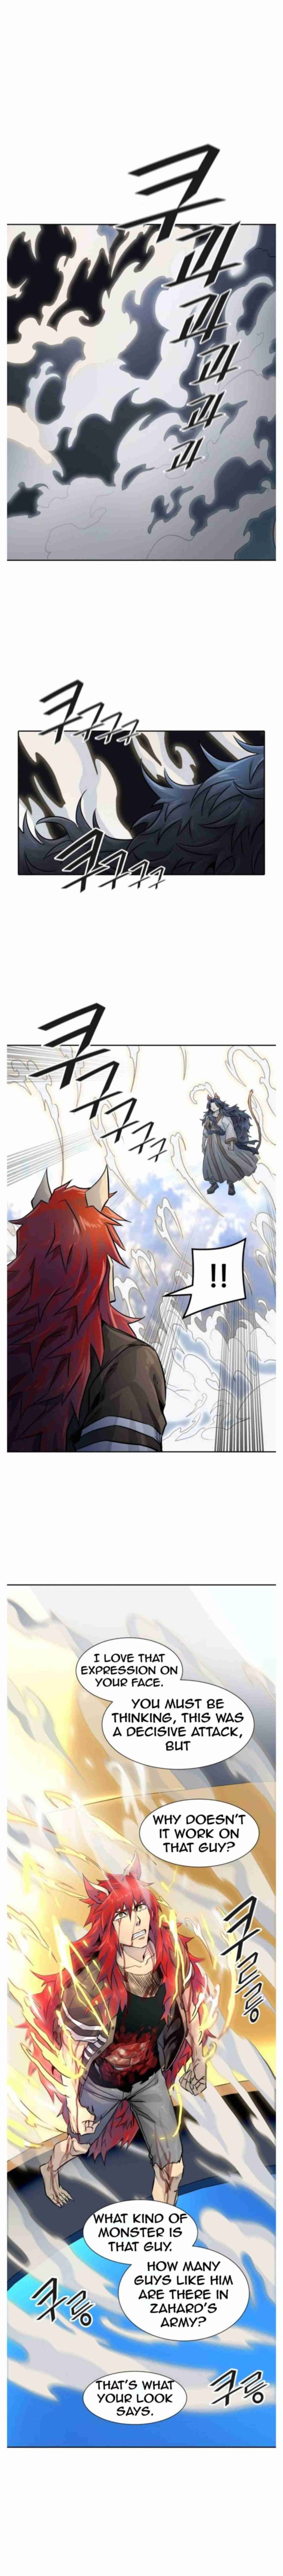 Tower Of God 497 10